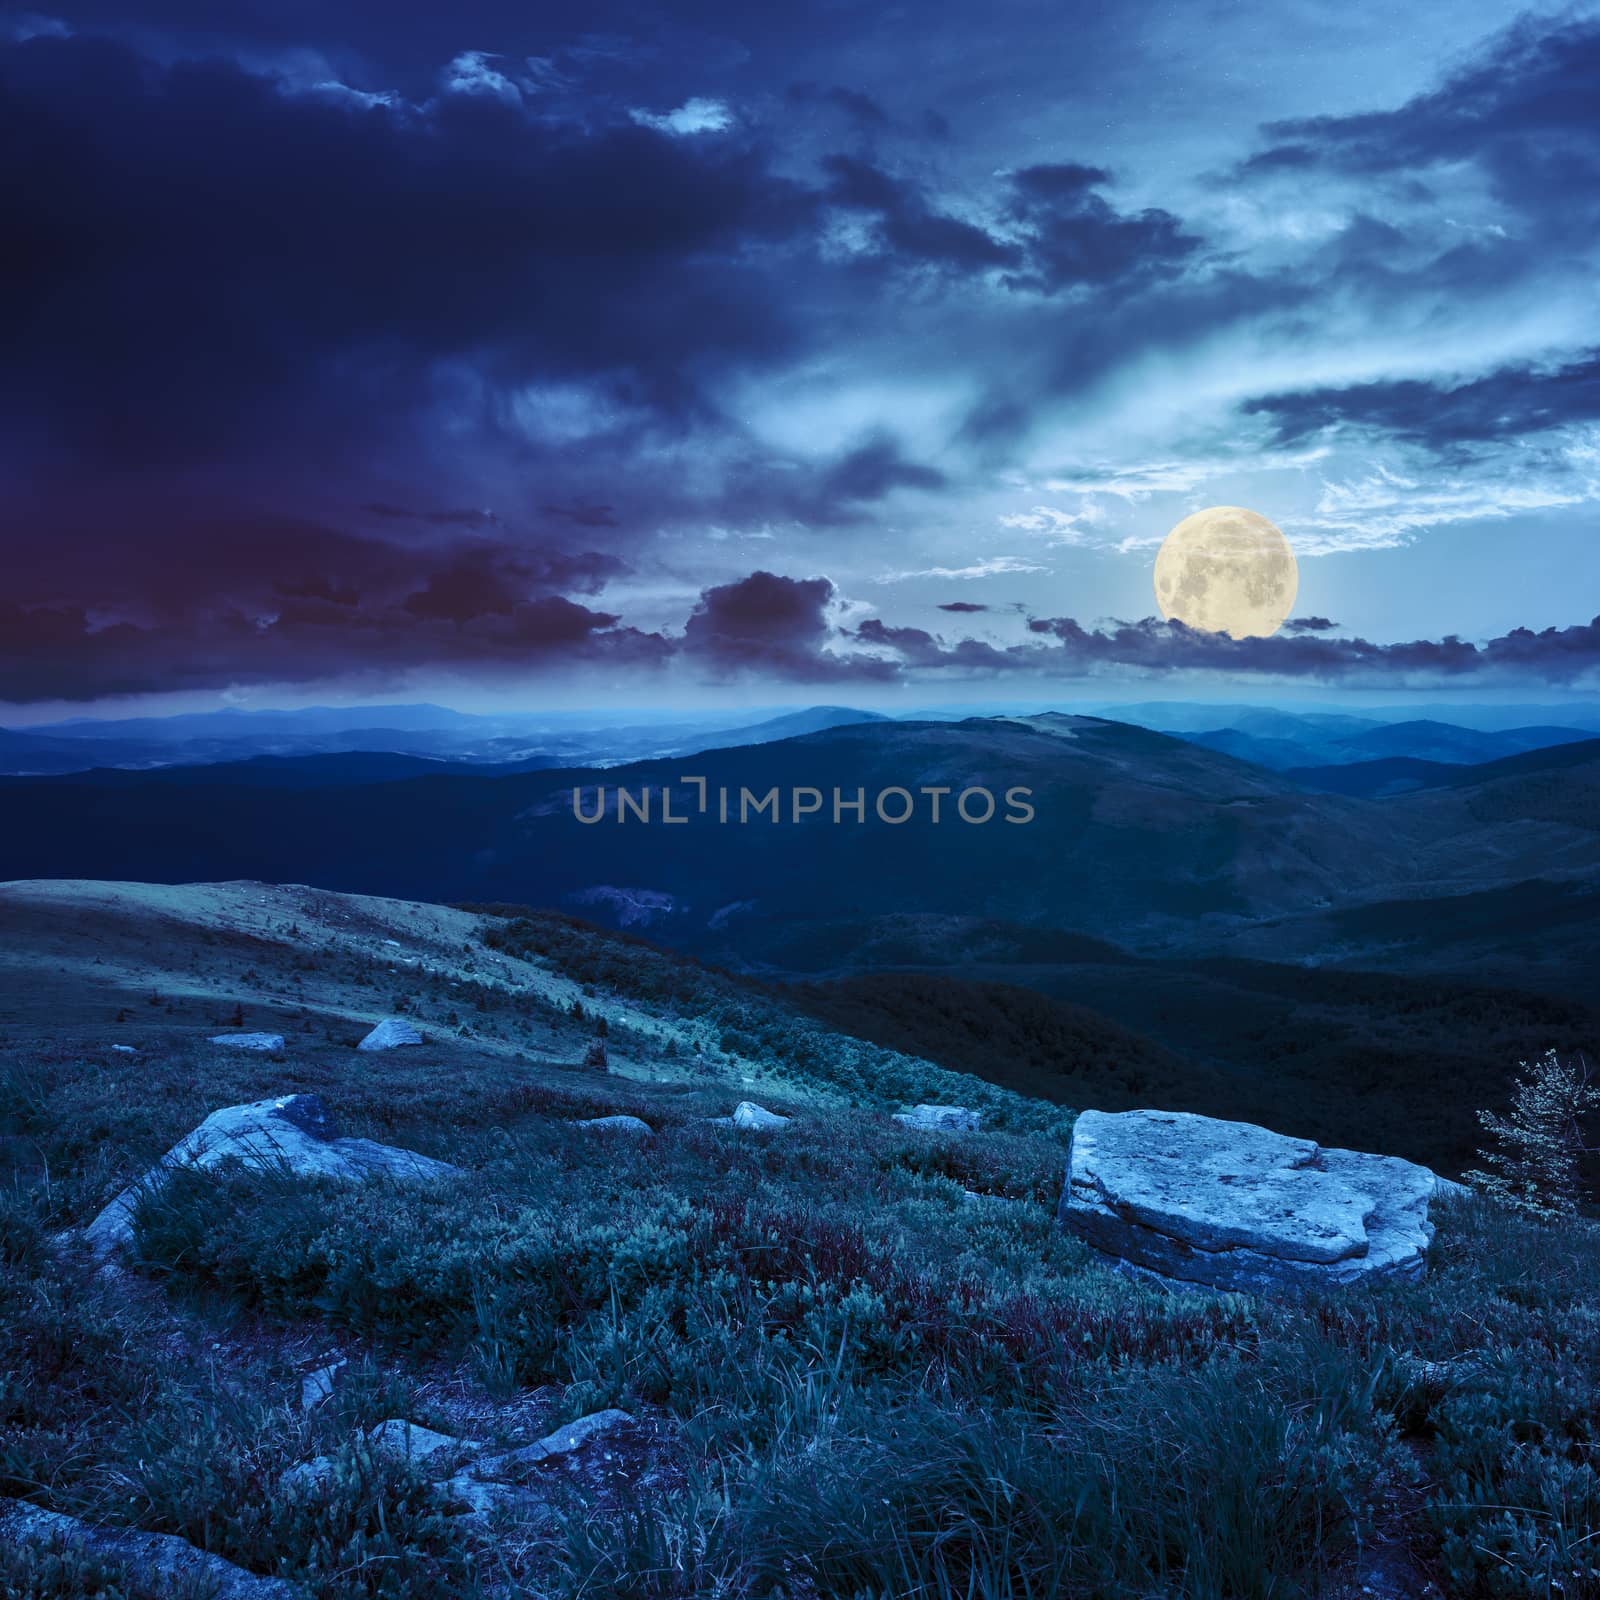 boulders on the hillside in high mountains at night by Pellinni